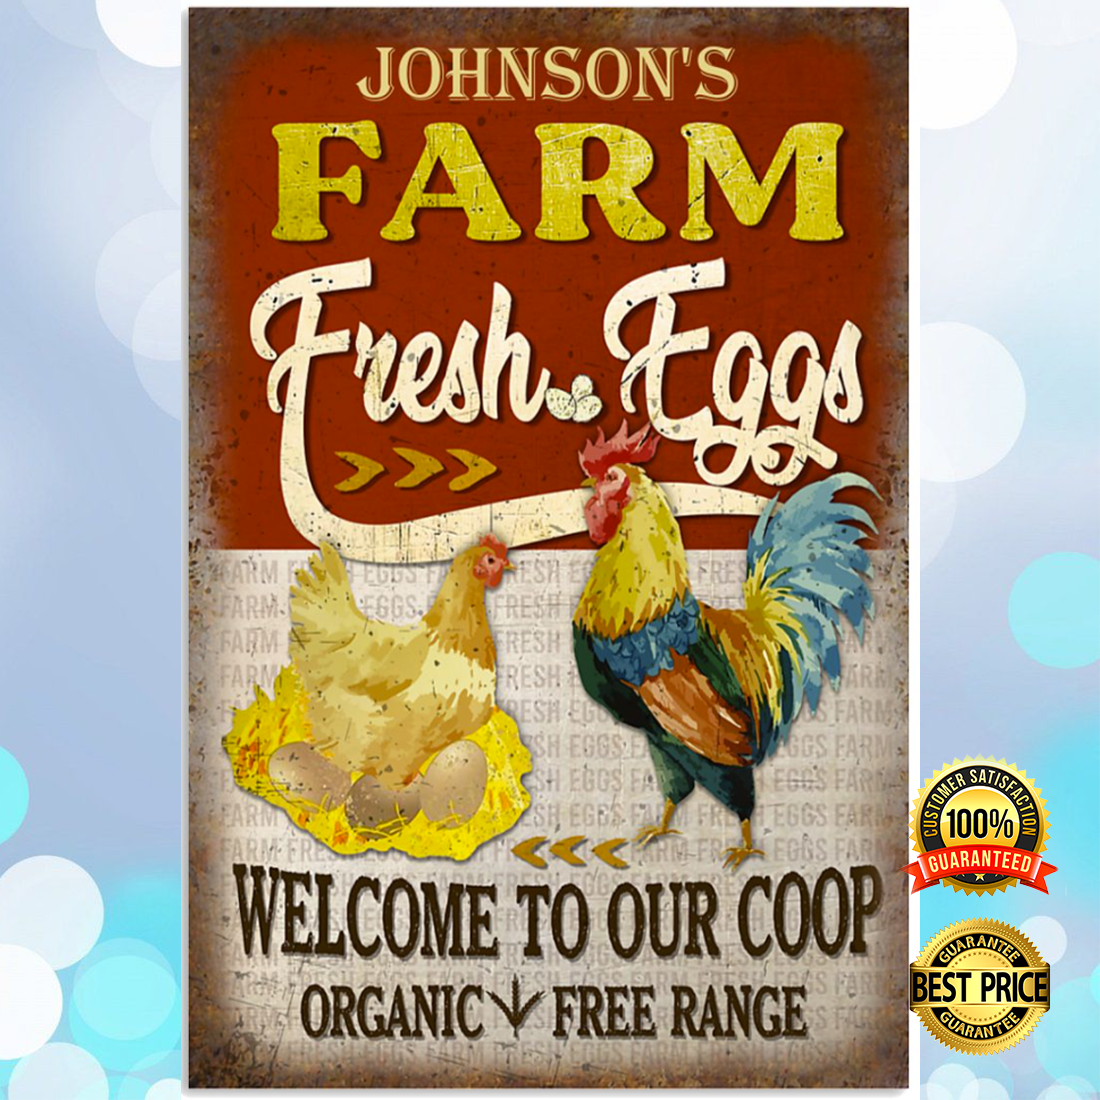 Personalized farm fresh eggs welcome to our coop organic free range poster 5